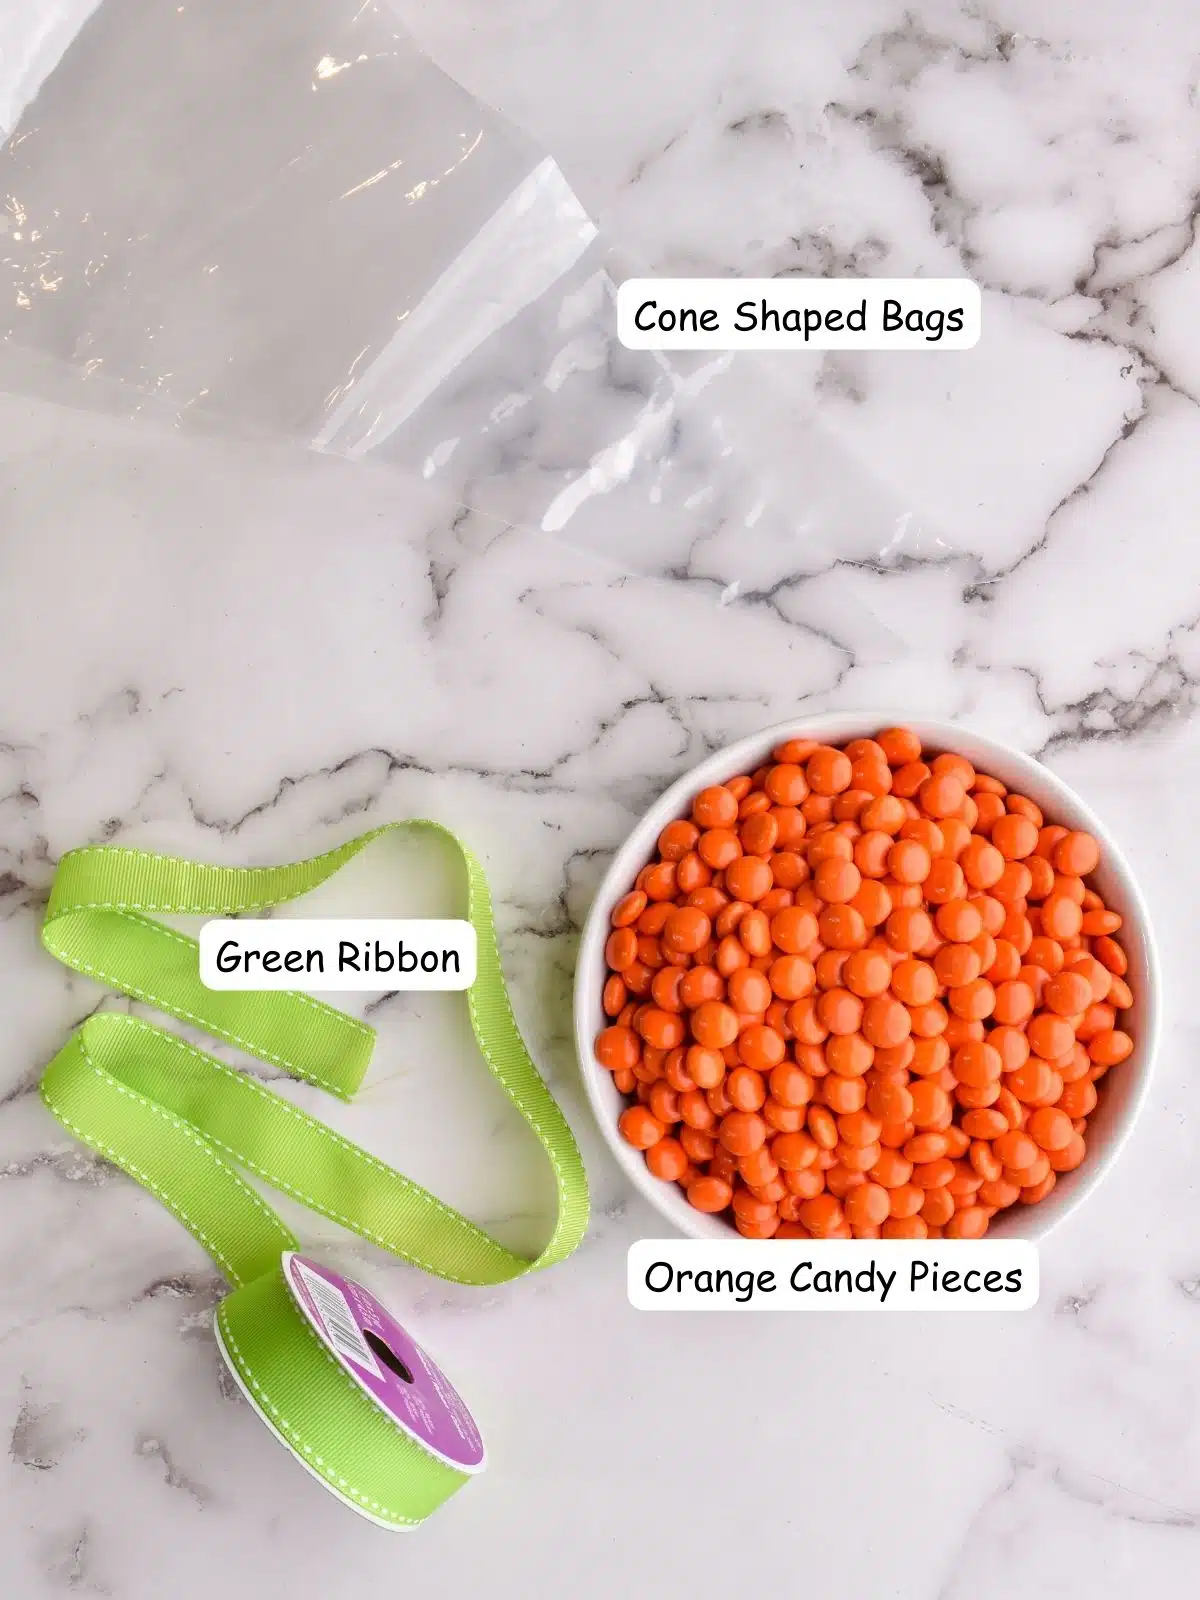 cone shaped bags, green ribbon and orange candy pieces in bowl.